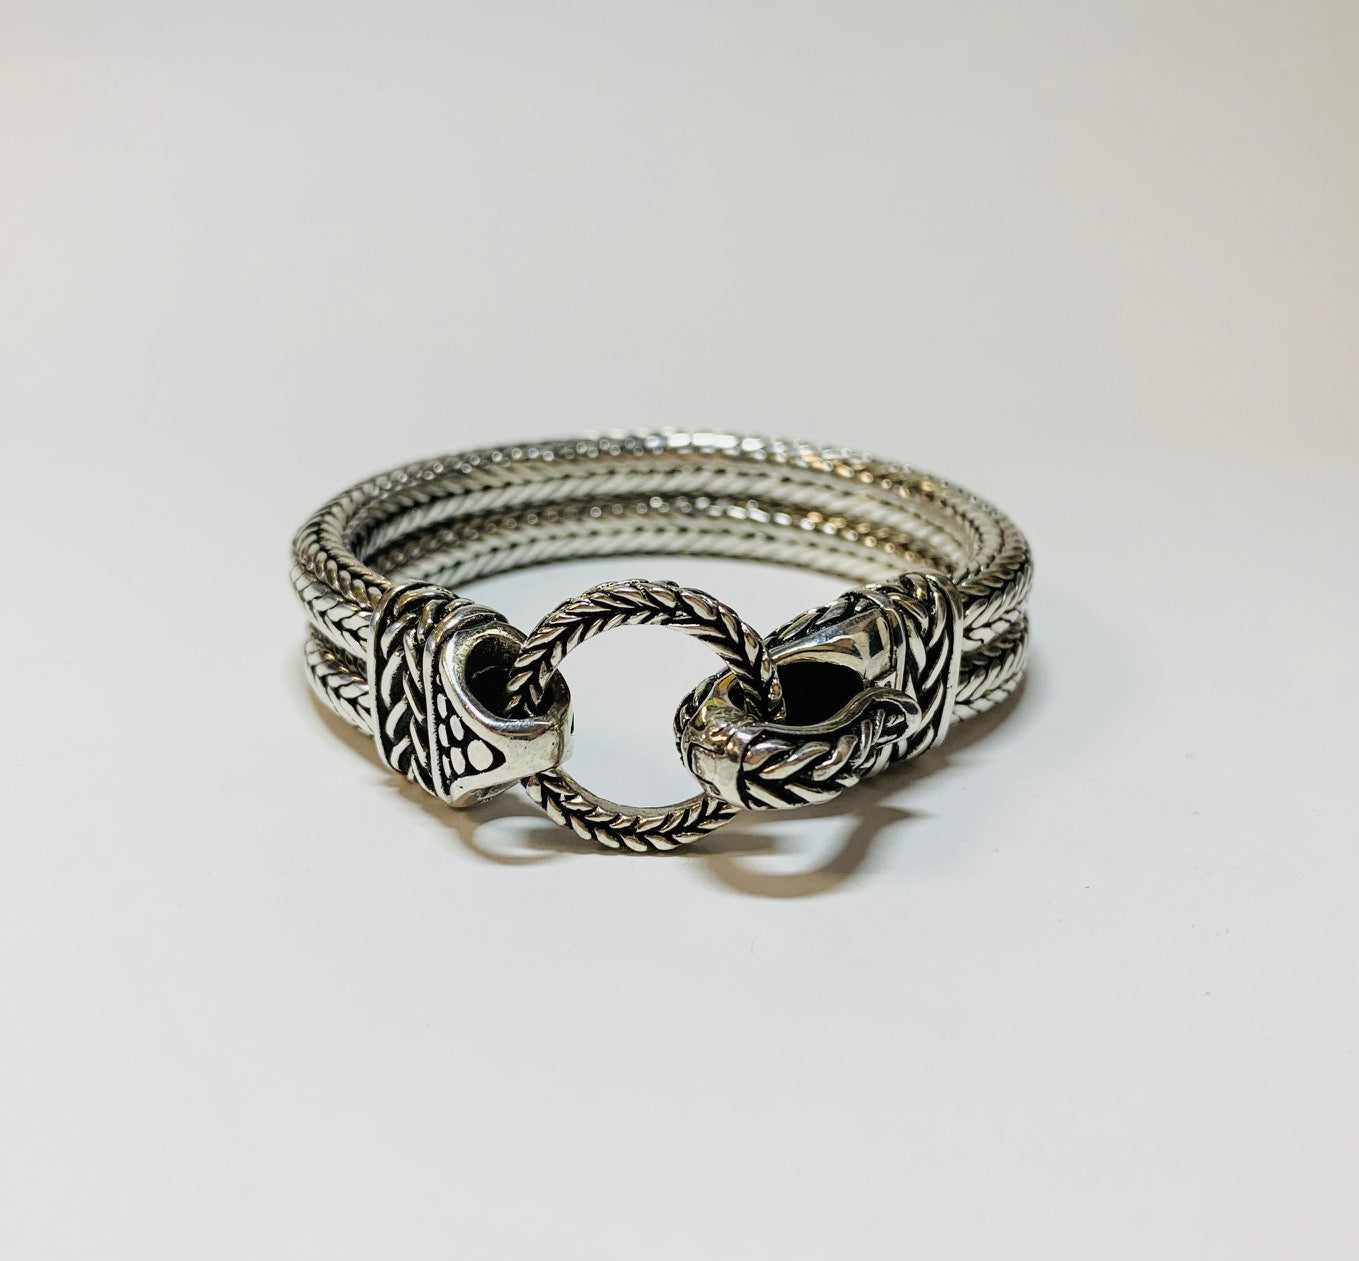 House of Bali By George Thomas Sterling Silver Braided Bracelet 